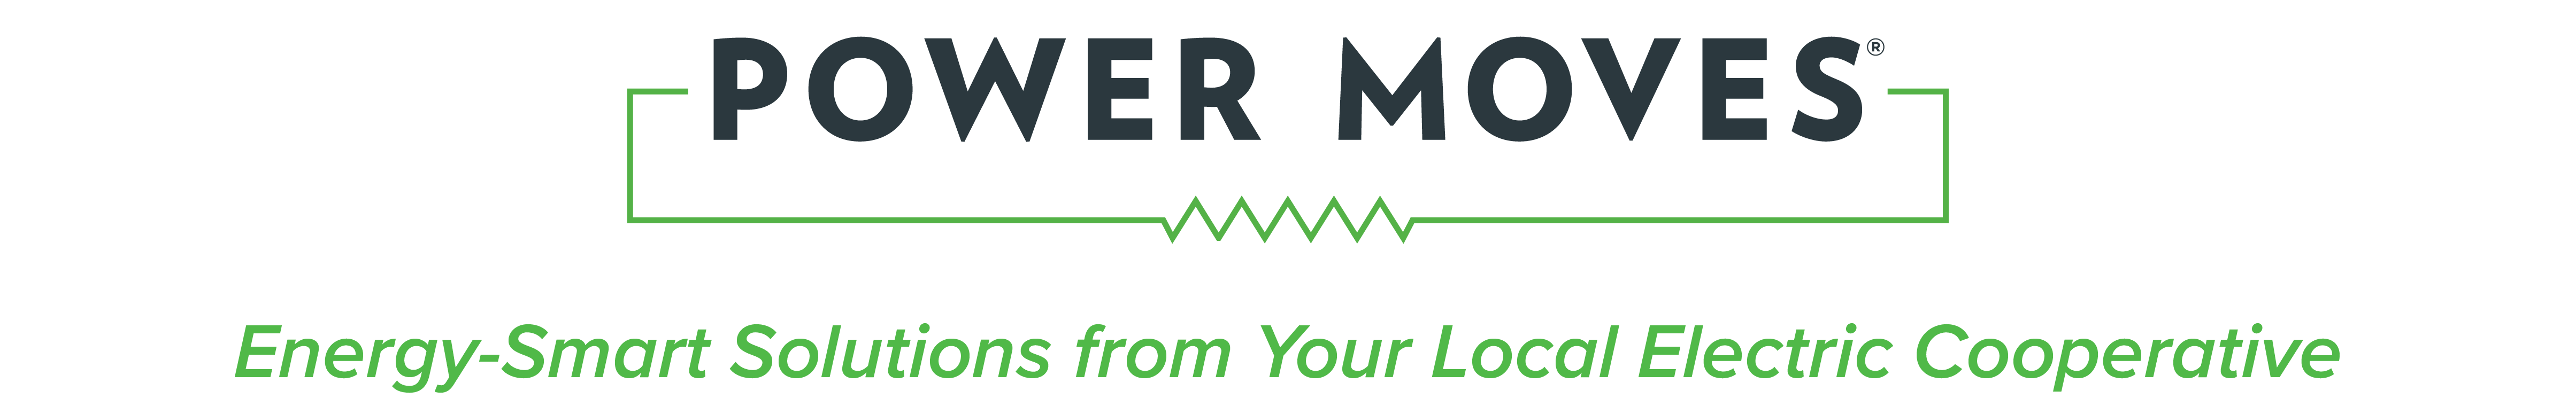 POWERMOVES.COM Energy Smart Solutions from Your Local Electric Cooperative